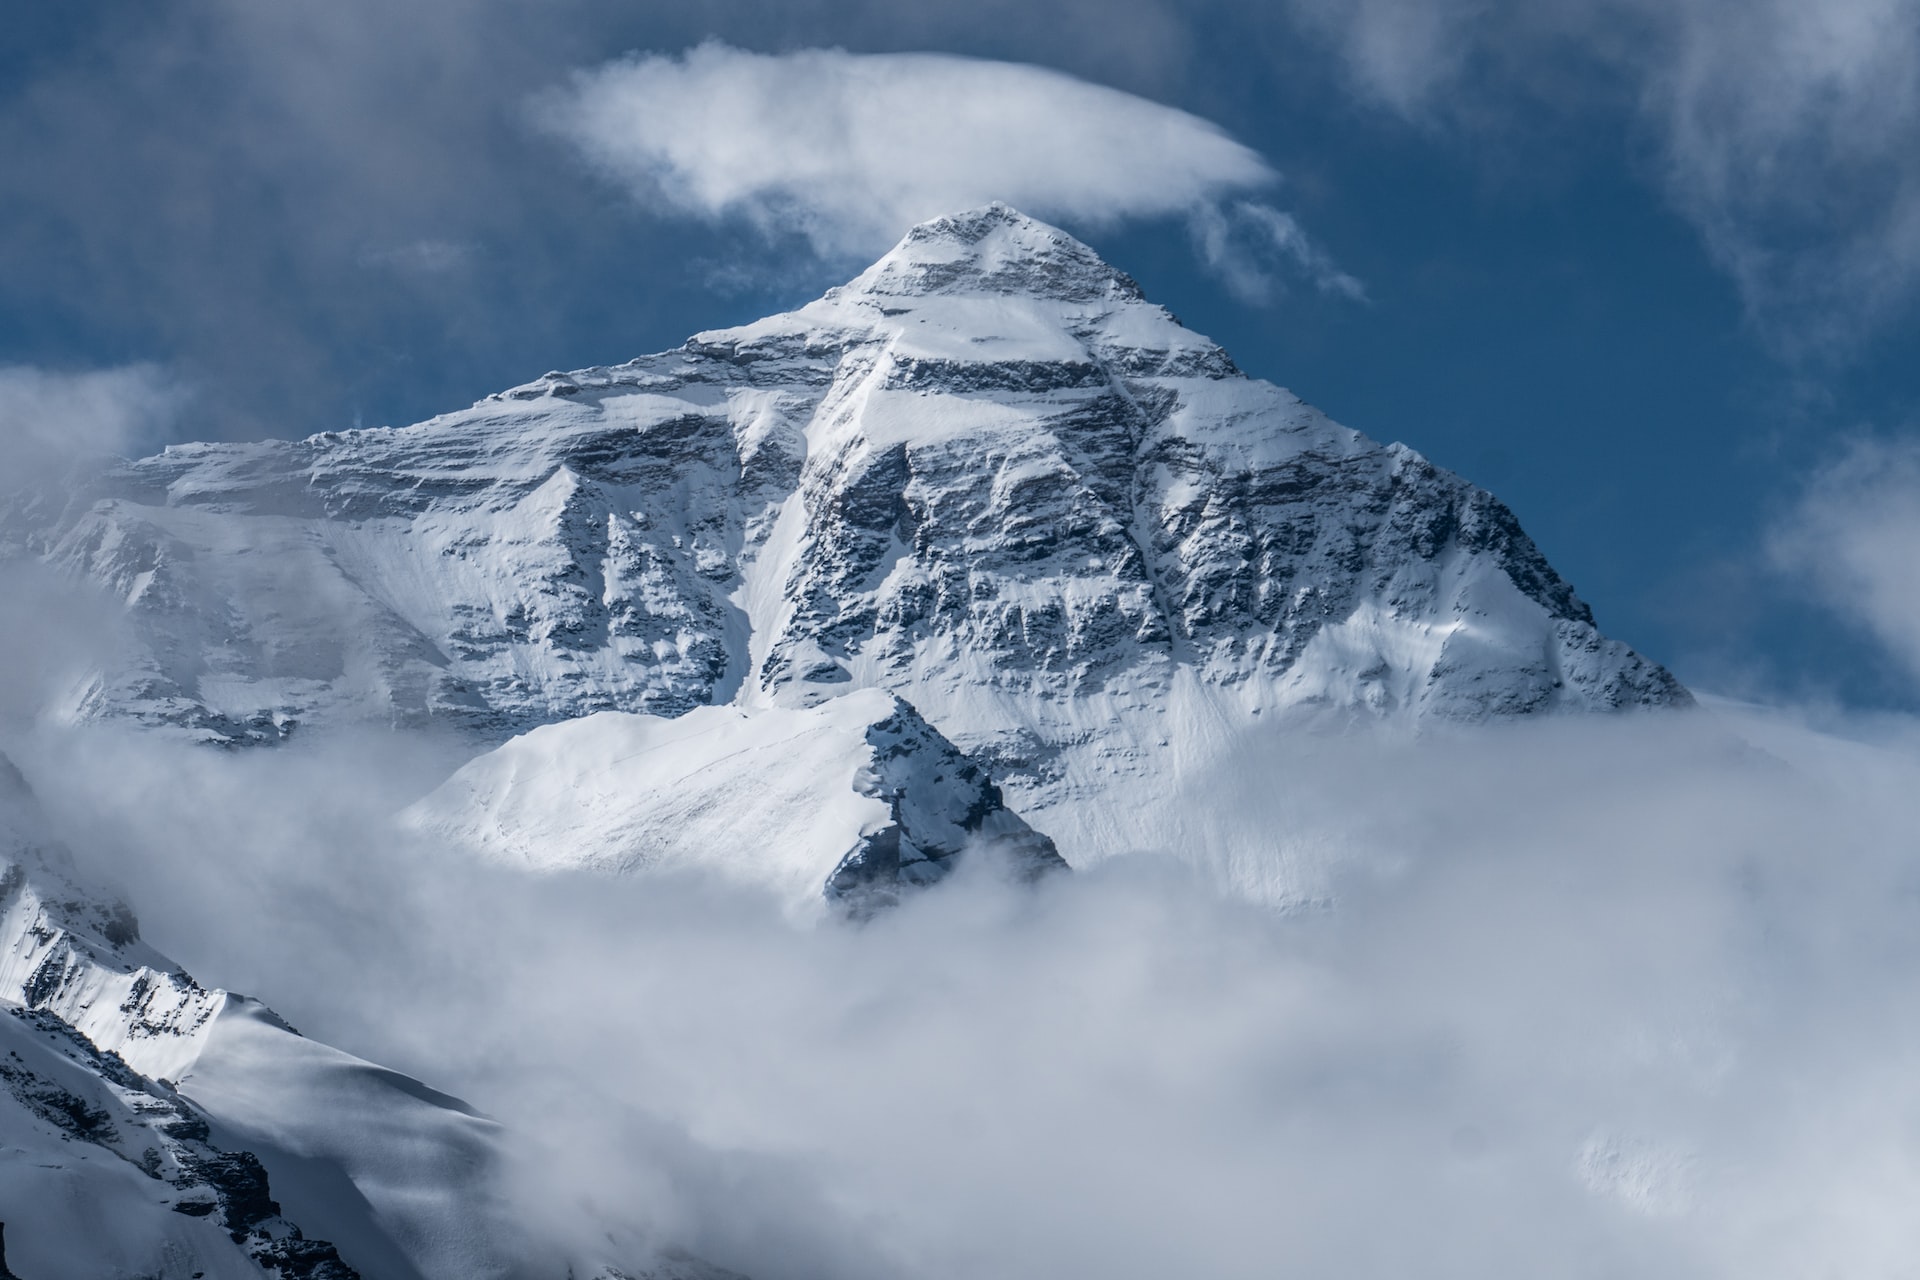 How to See Mount Everest Without Climbing